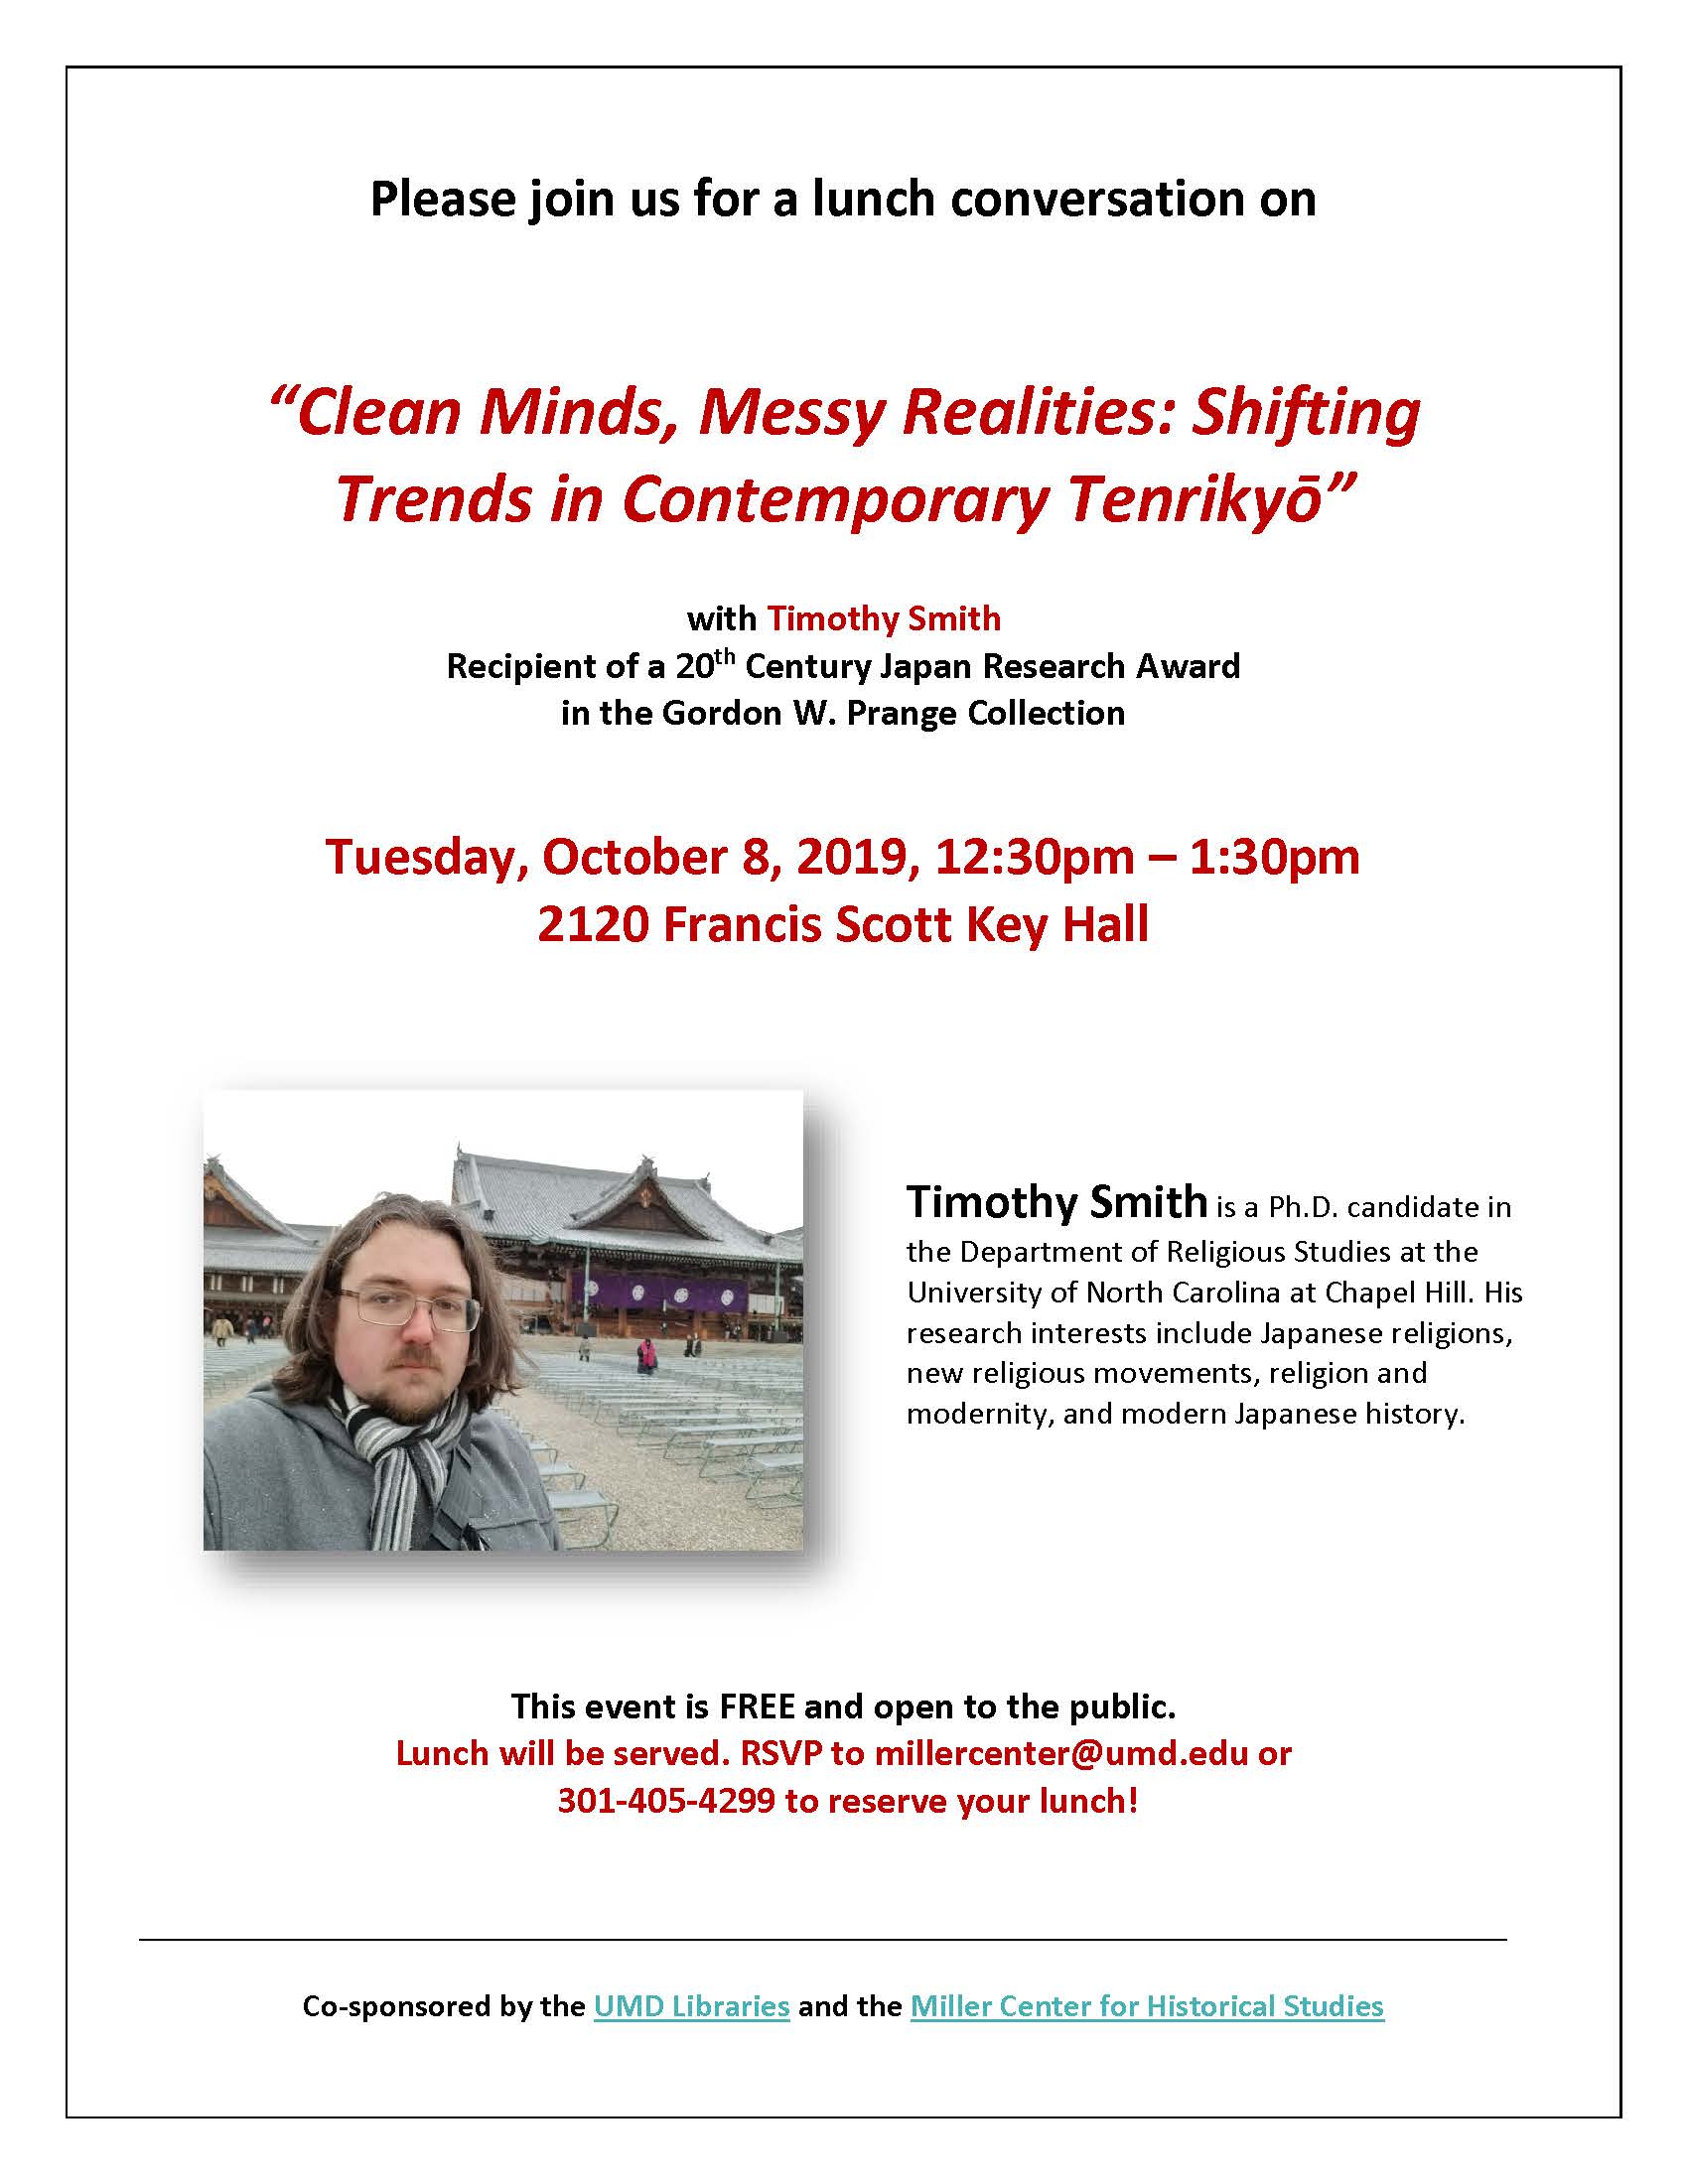 Image for event - Clean Minds, Messy Realities: Shifting Trends in Contemporary Tenrikyō